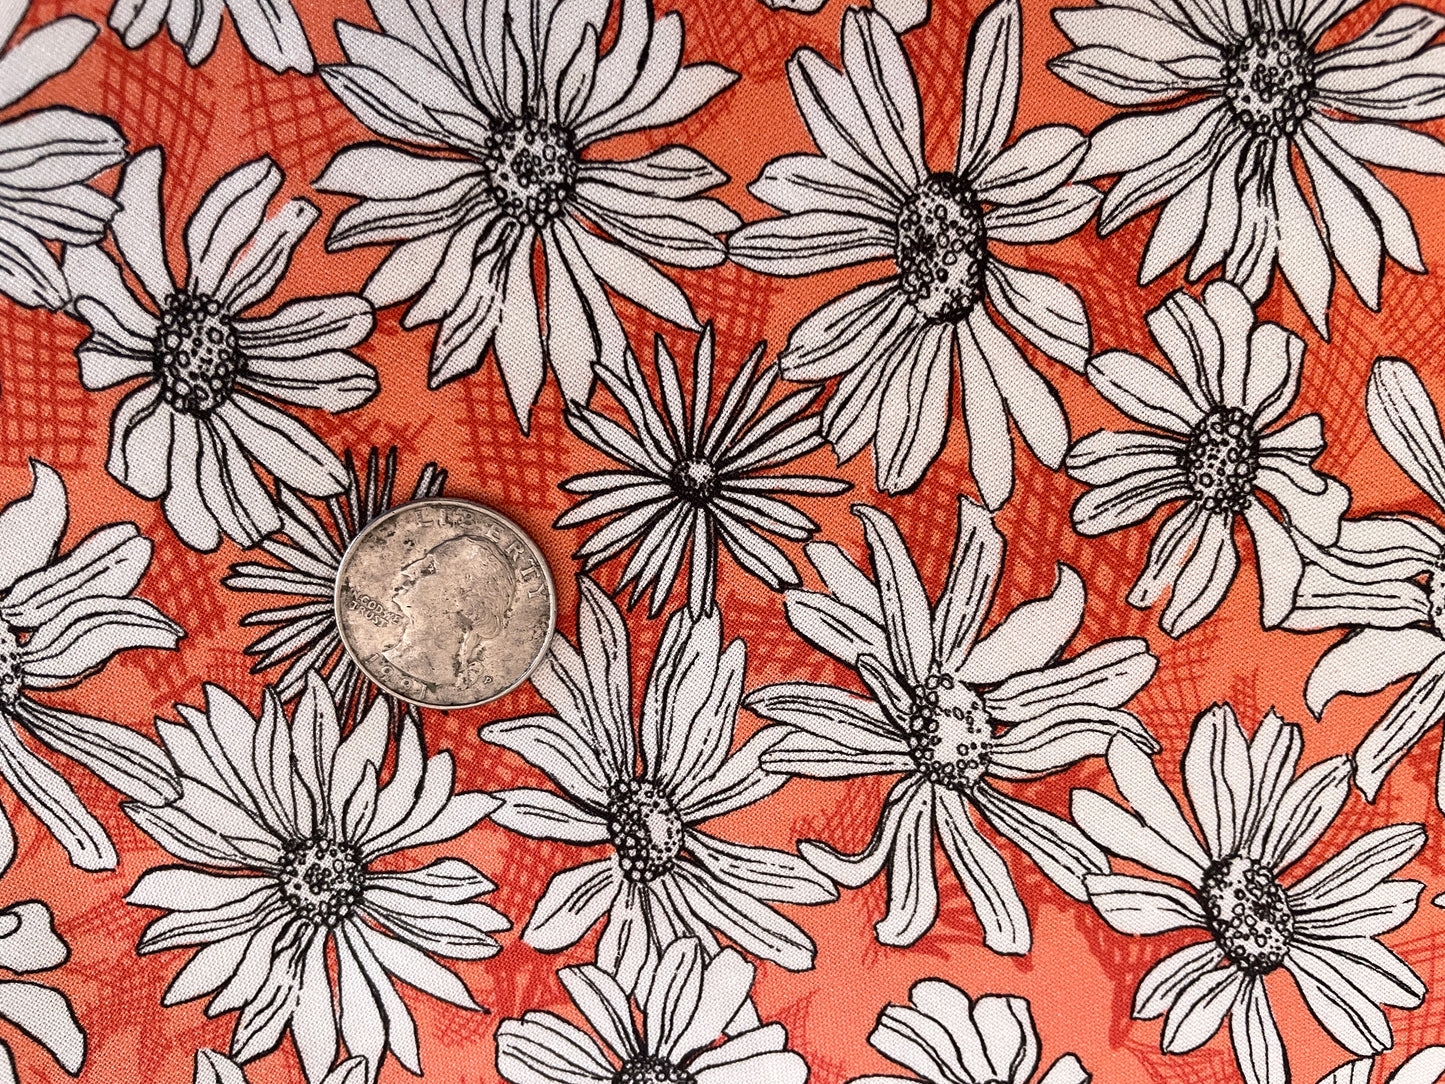 100% Cotton - Quilting Weight - Scribble Daisies on Orange